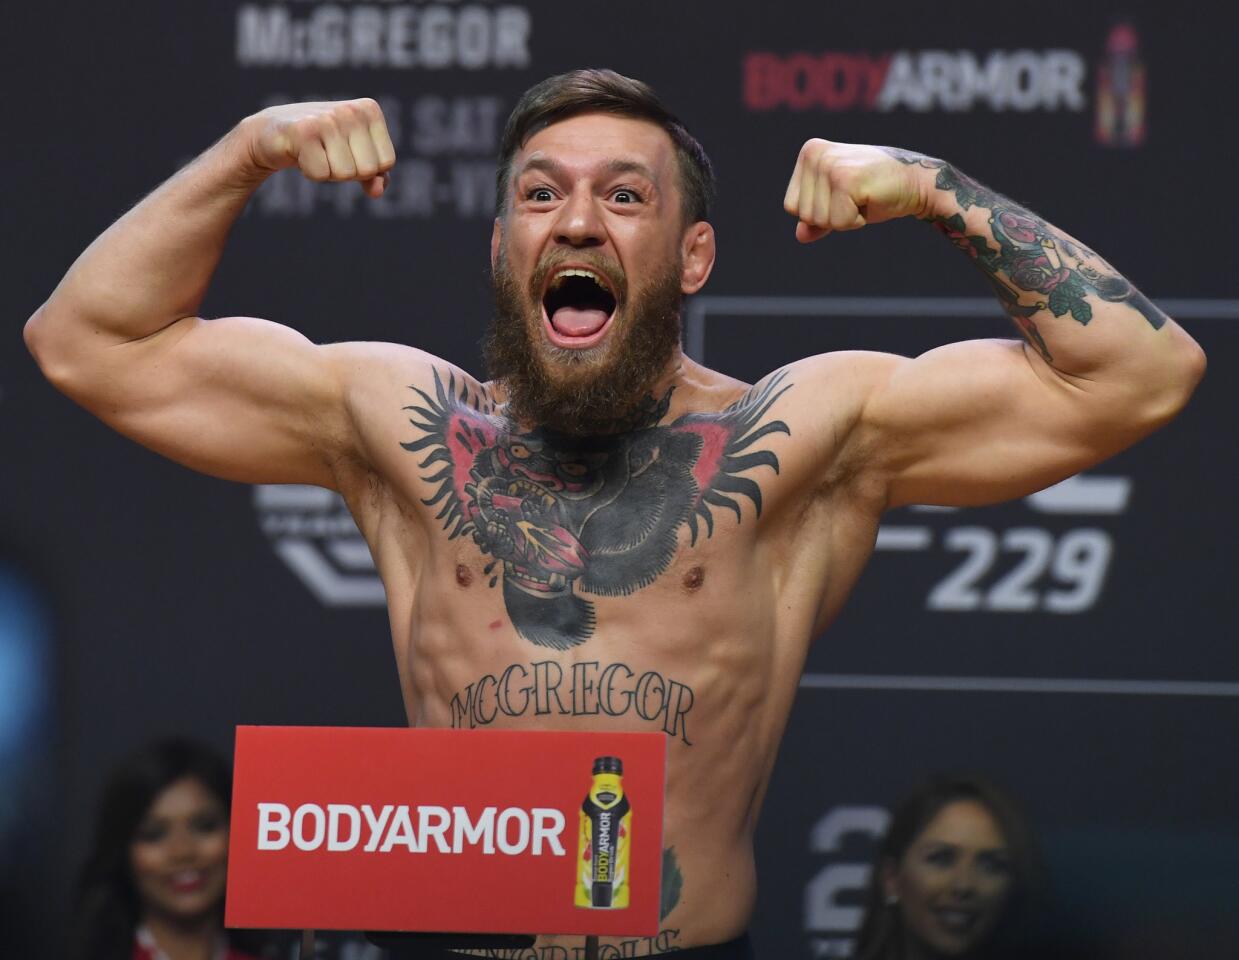 LAS VEGAS, NEVADA - OCTOBER 05: Conor McGregor poses during a ceremonial weigh-in for UFC 229 at T-Mobile Arena on October 05, 2018 in Las Vegas, Nevada. McGregor will challenge UFC lightweight champion Khabib Nurmagomedov for his title at UFC 229 on October 6 at T-Mobile Arena in Las Vegas. (Photo by Ethan Miller/Getty Images) ** OUTS - ELSENT, FPG, CM - OUTS * NM, PH, VA if sourced by CT, LA or MoD **